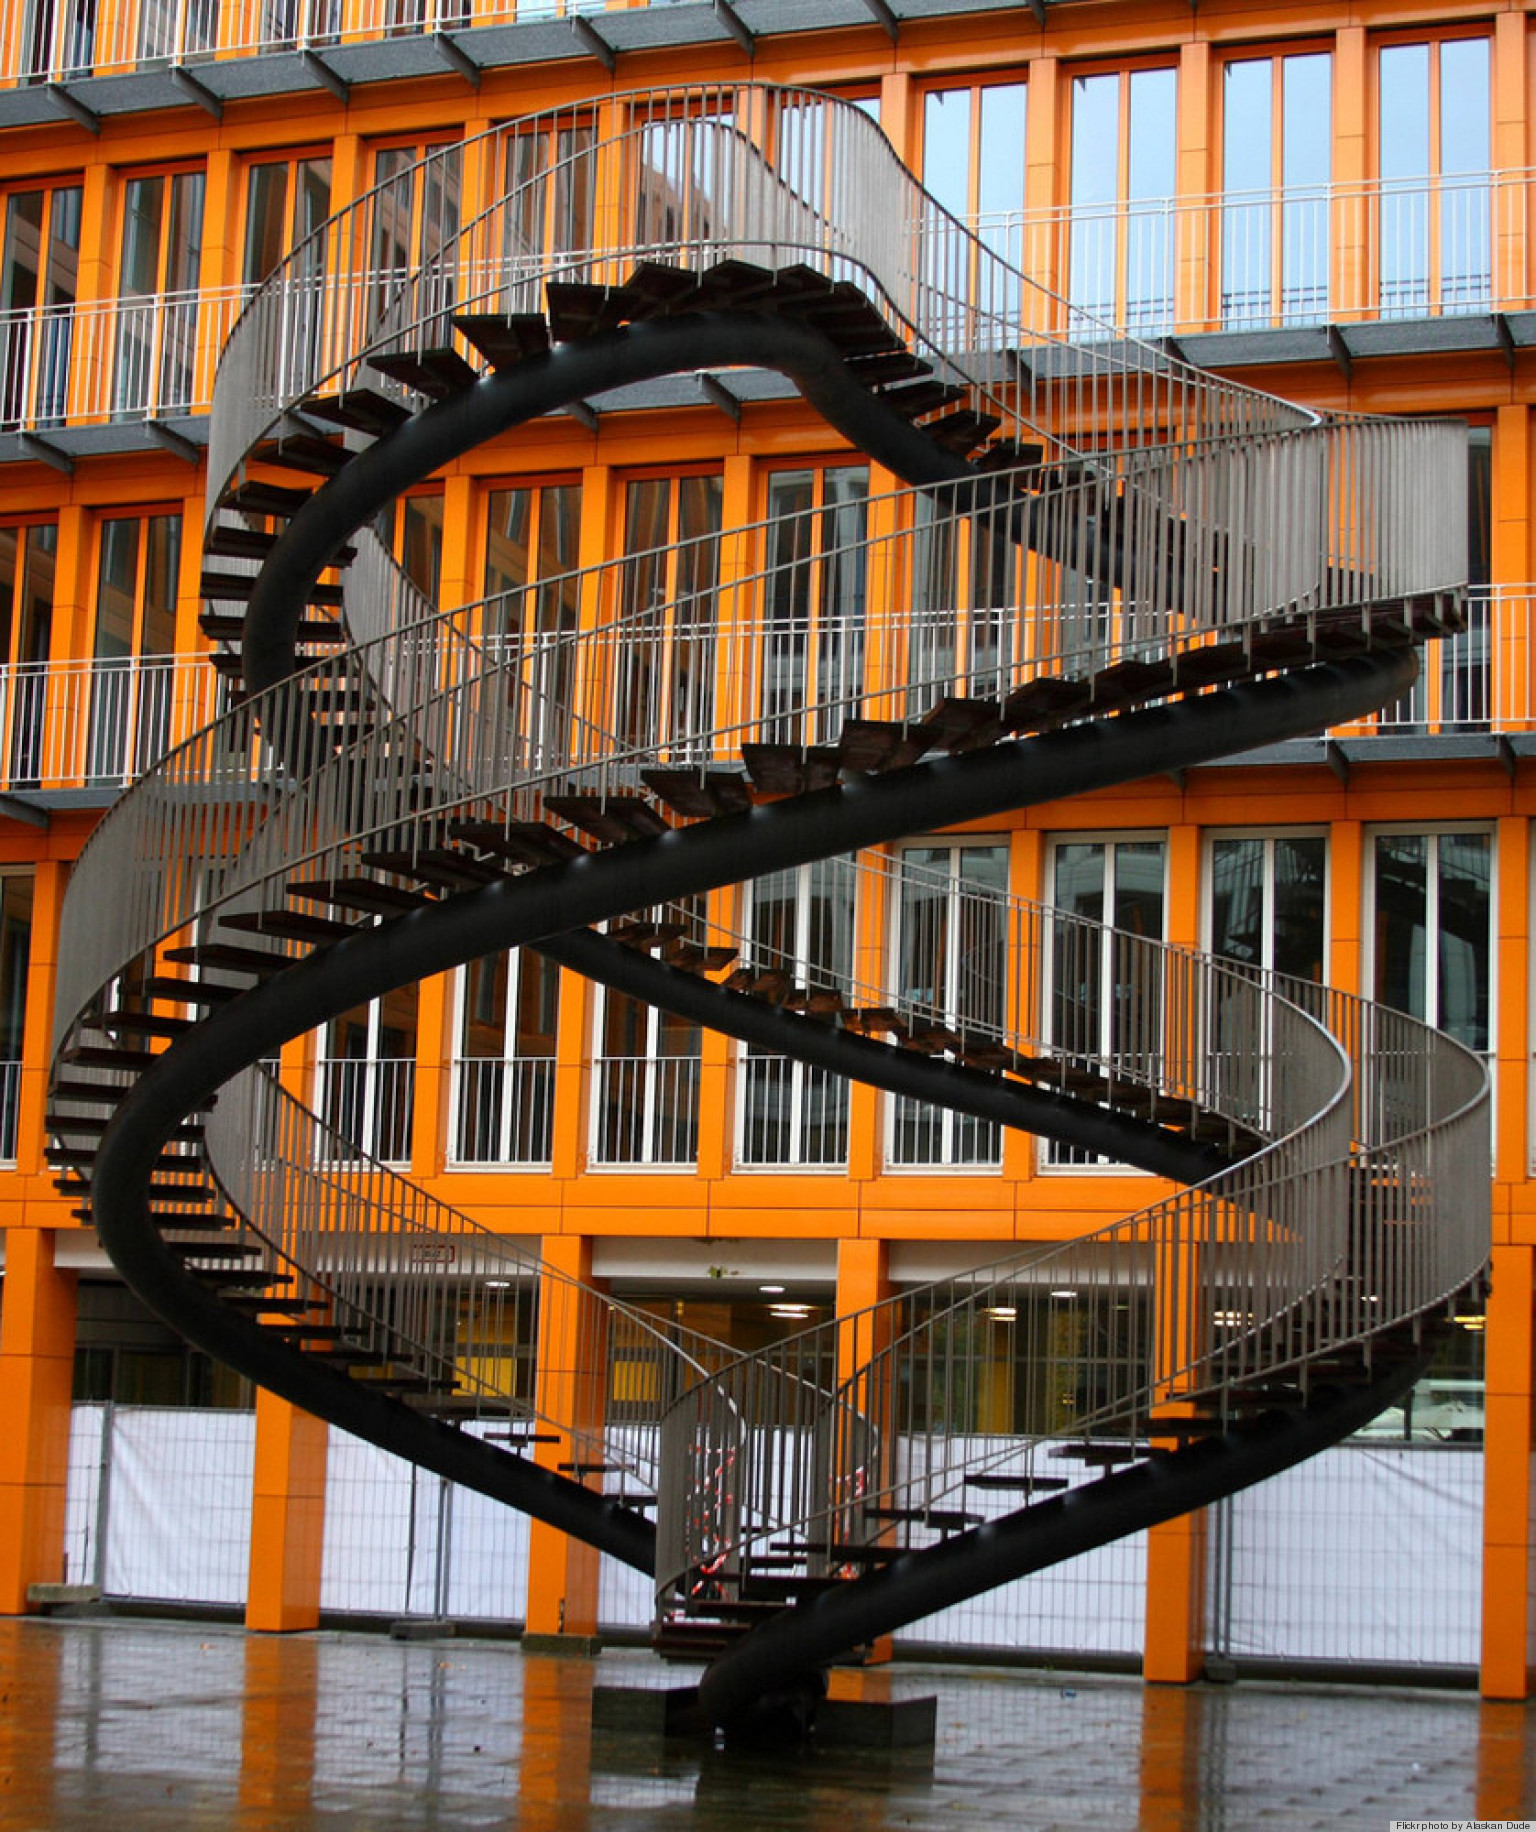 Extreme Staircases That Make Us Dizzy Just Looking At Them Photos